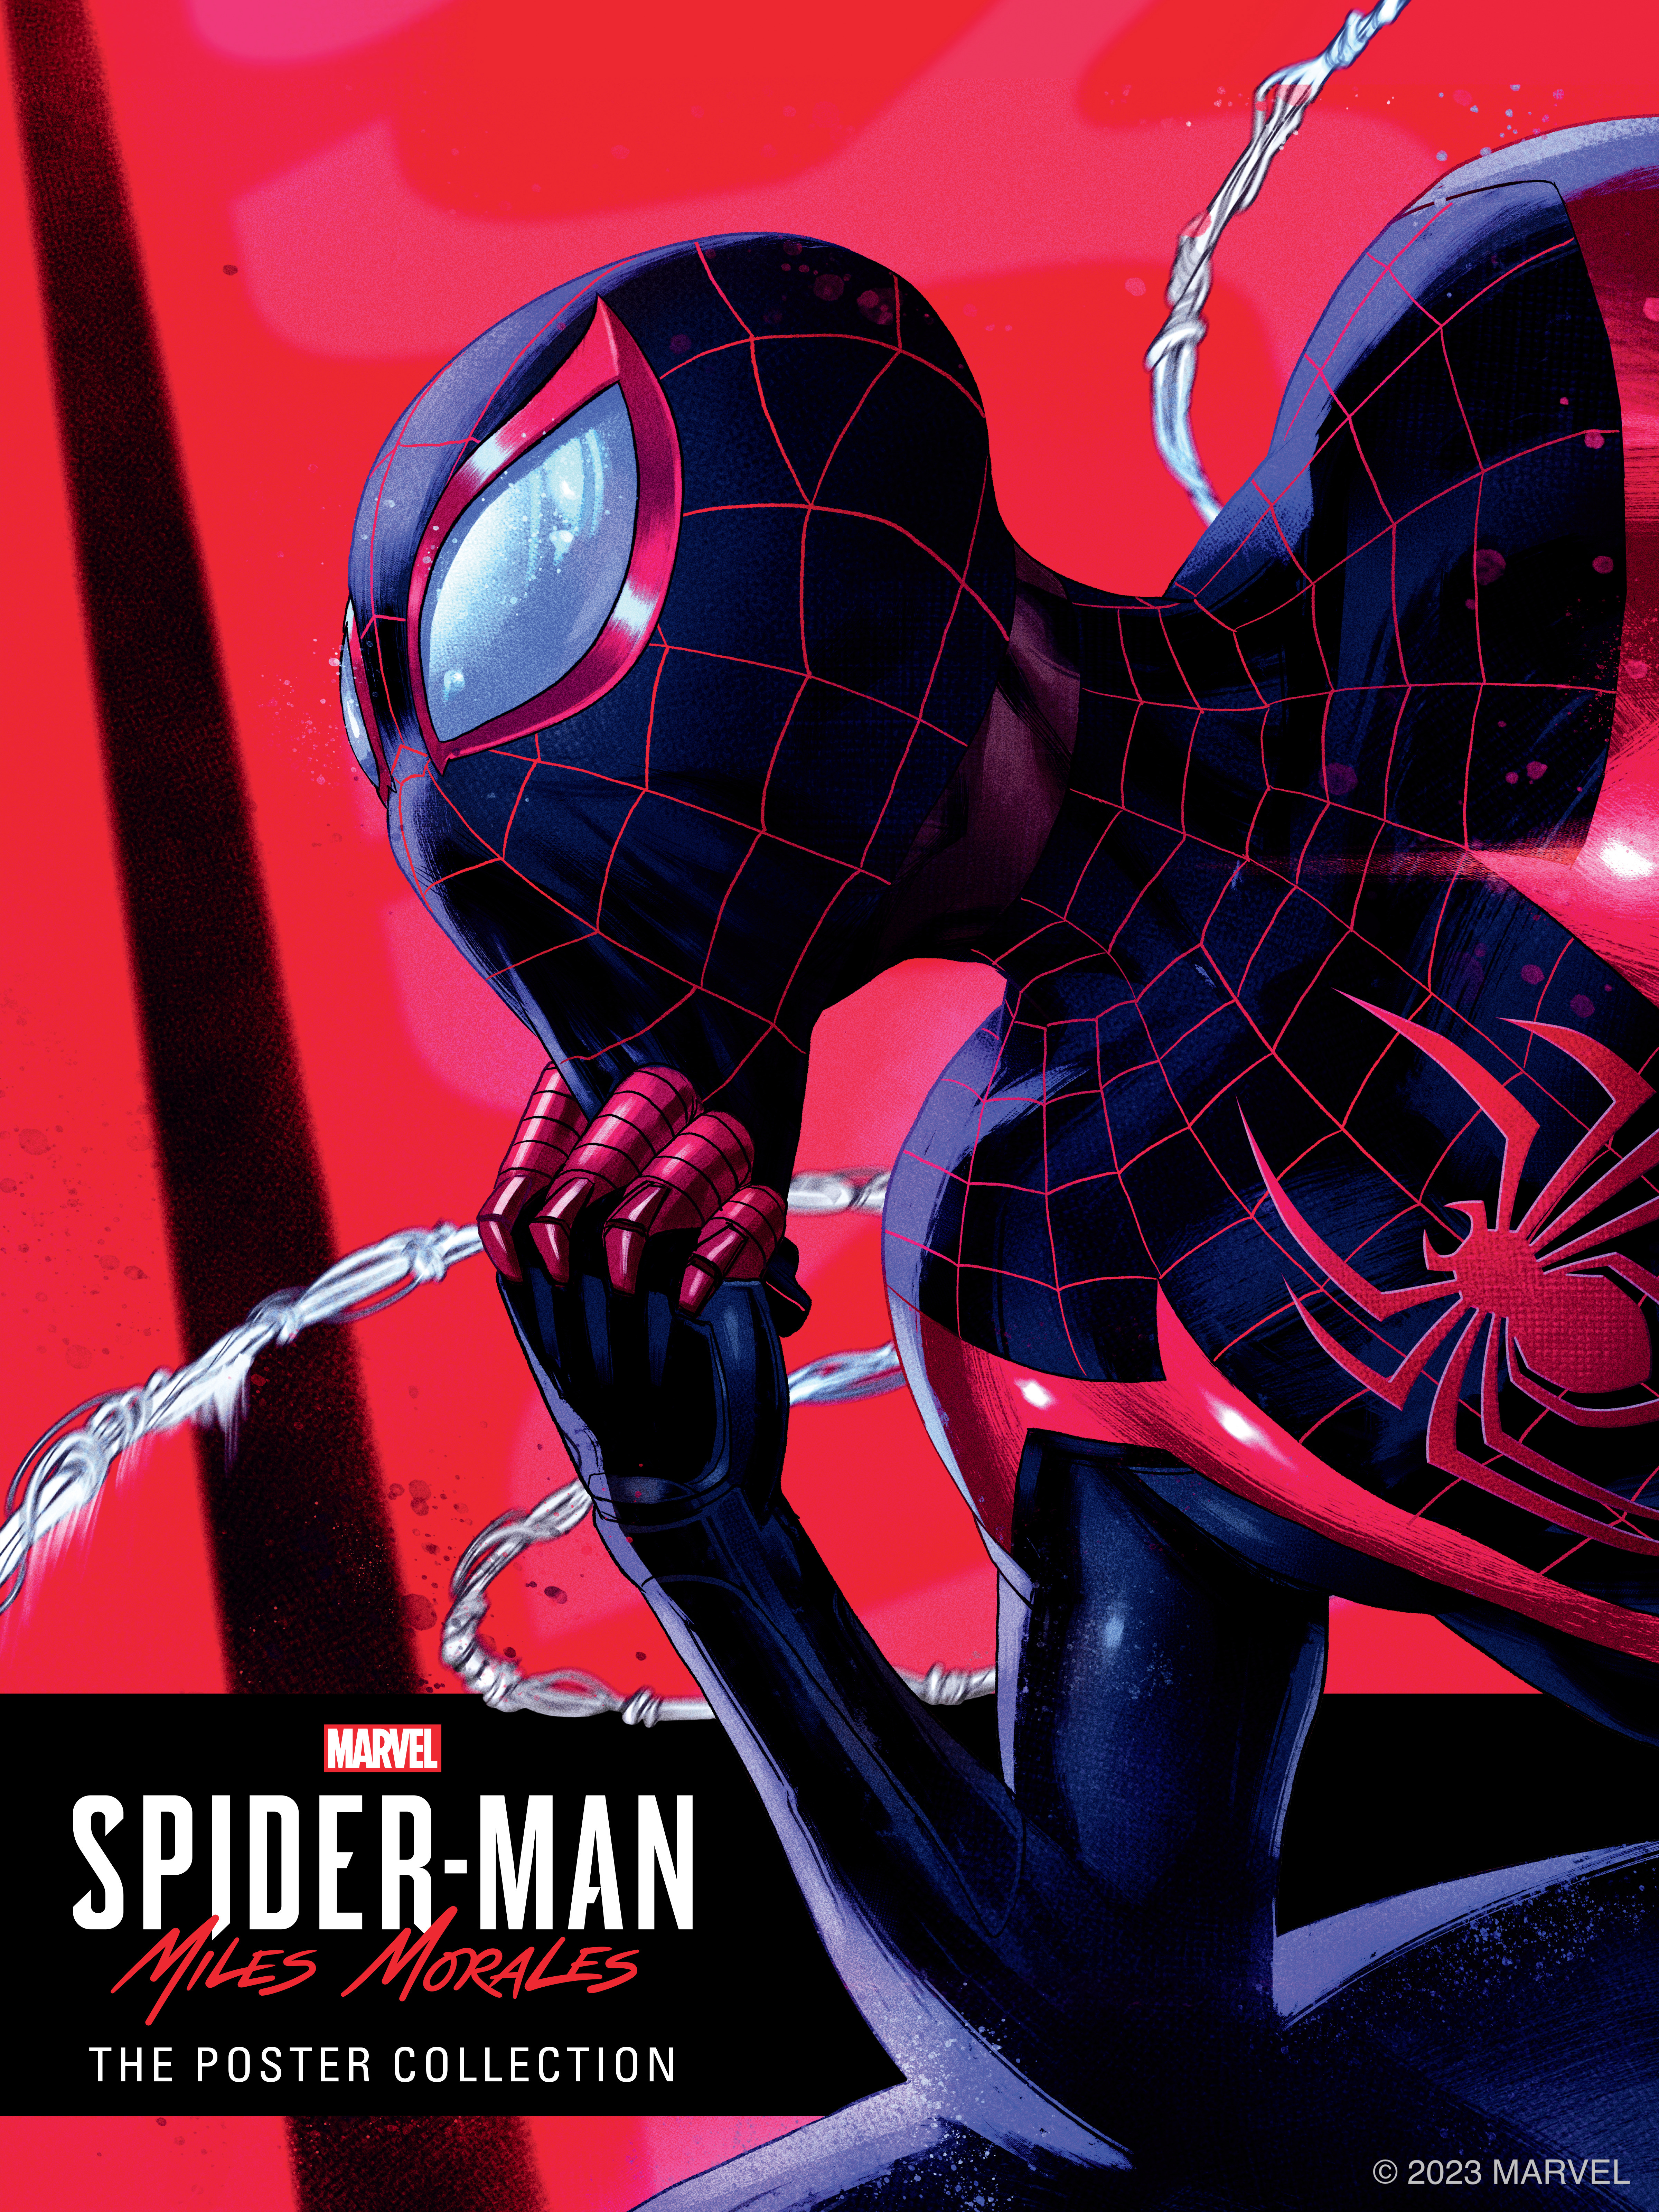 REVISIT MARVEL'S SPIDER-MAN: MILES MORALES IN AN ALL-NEW POSTER, miles  morales 